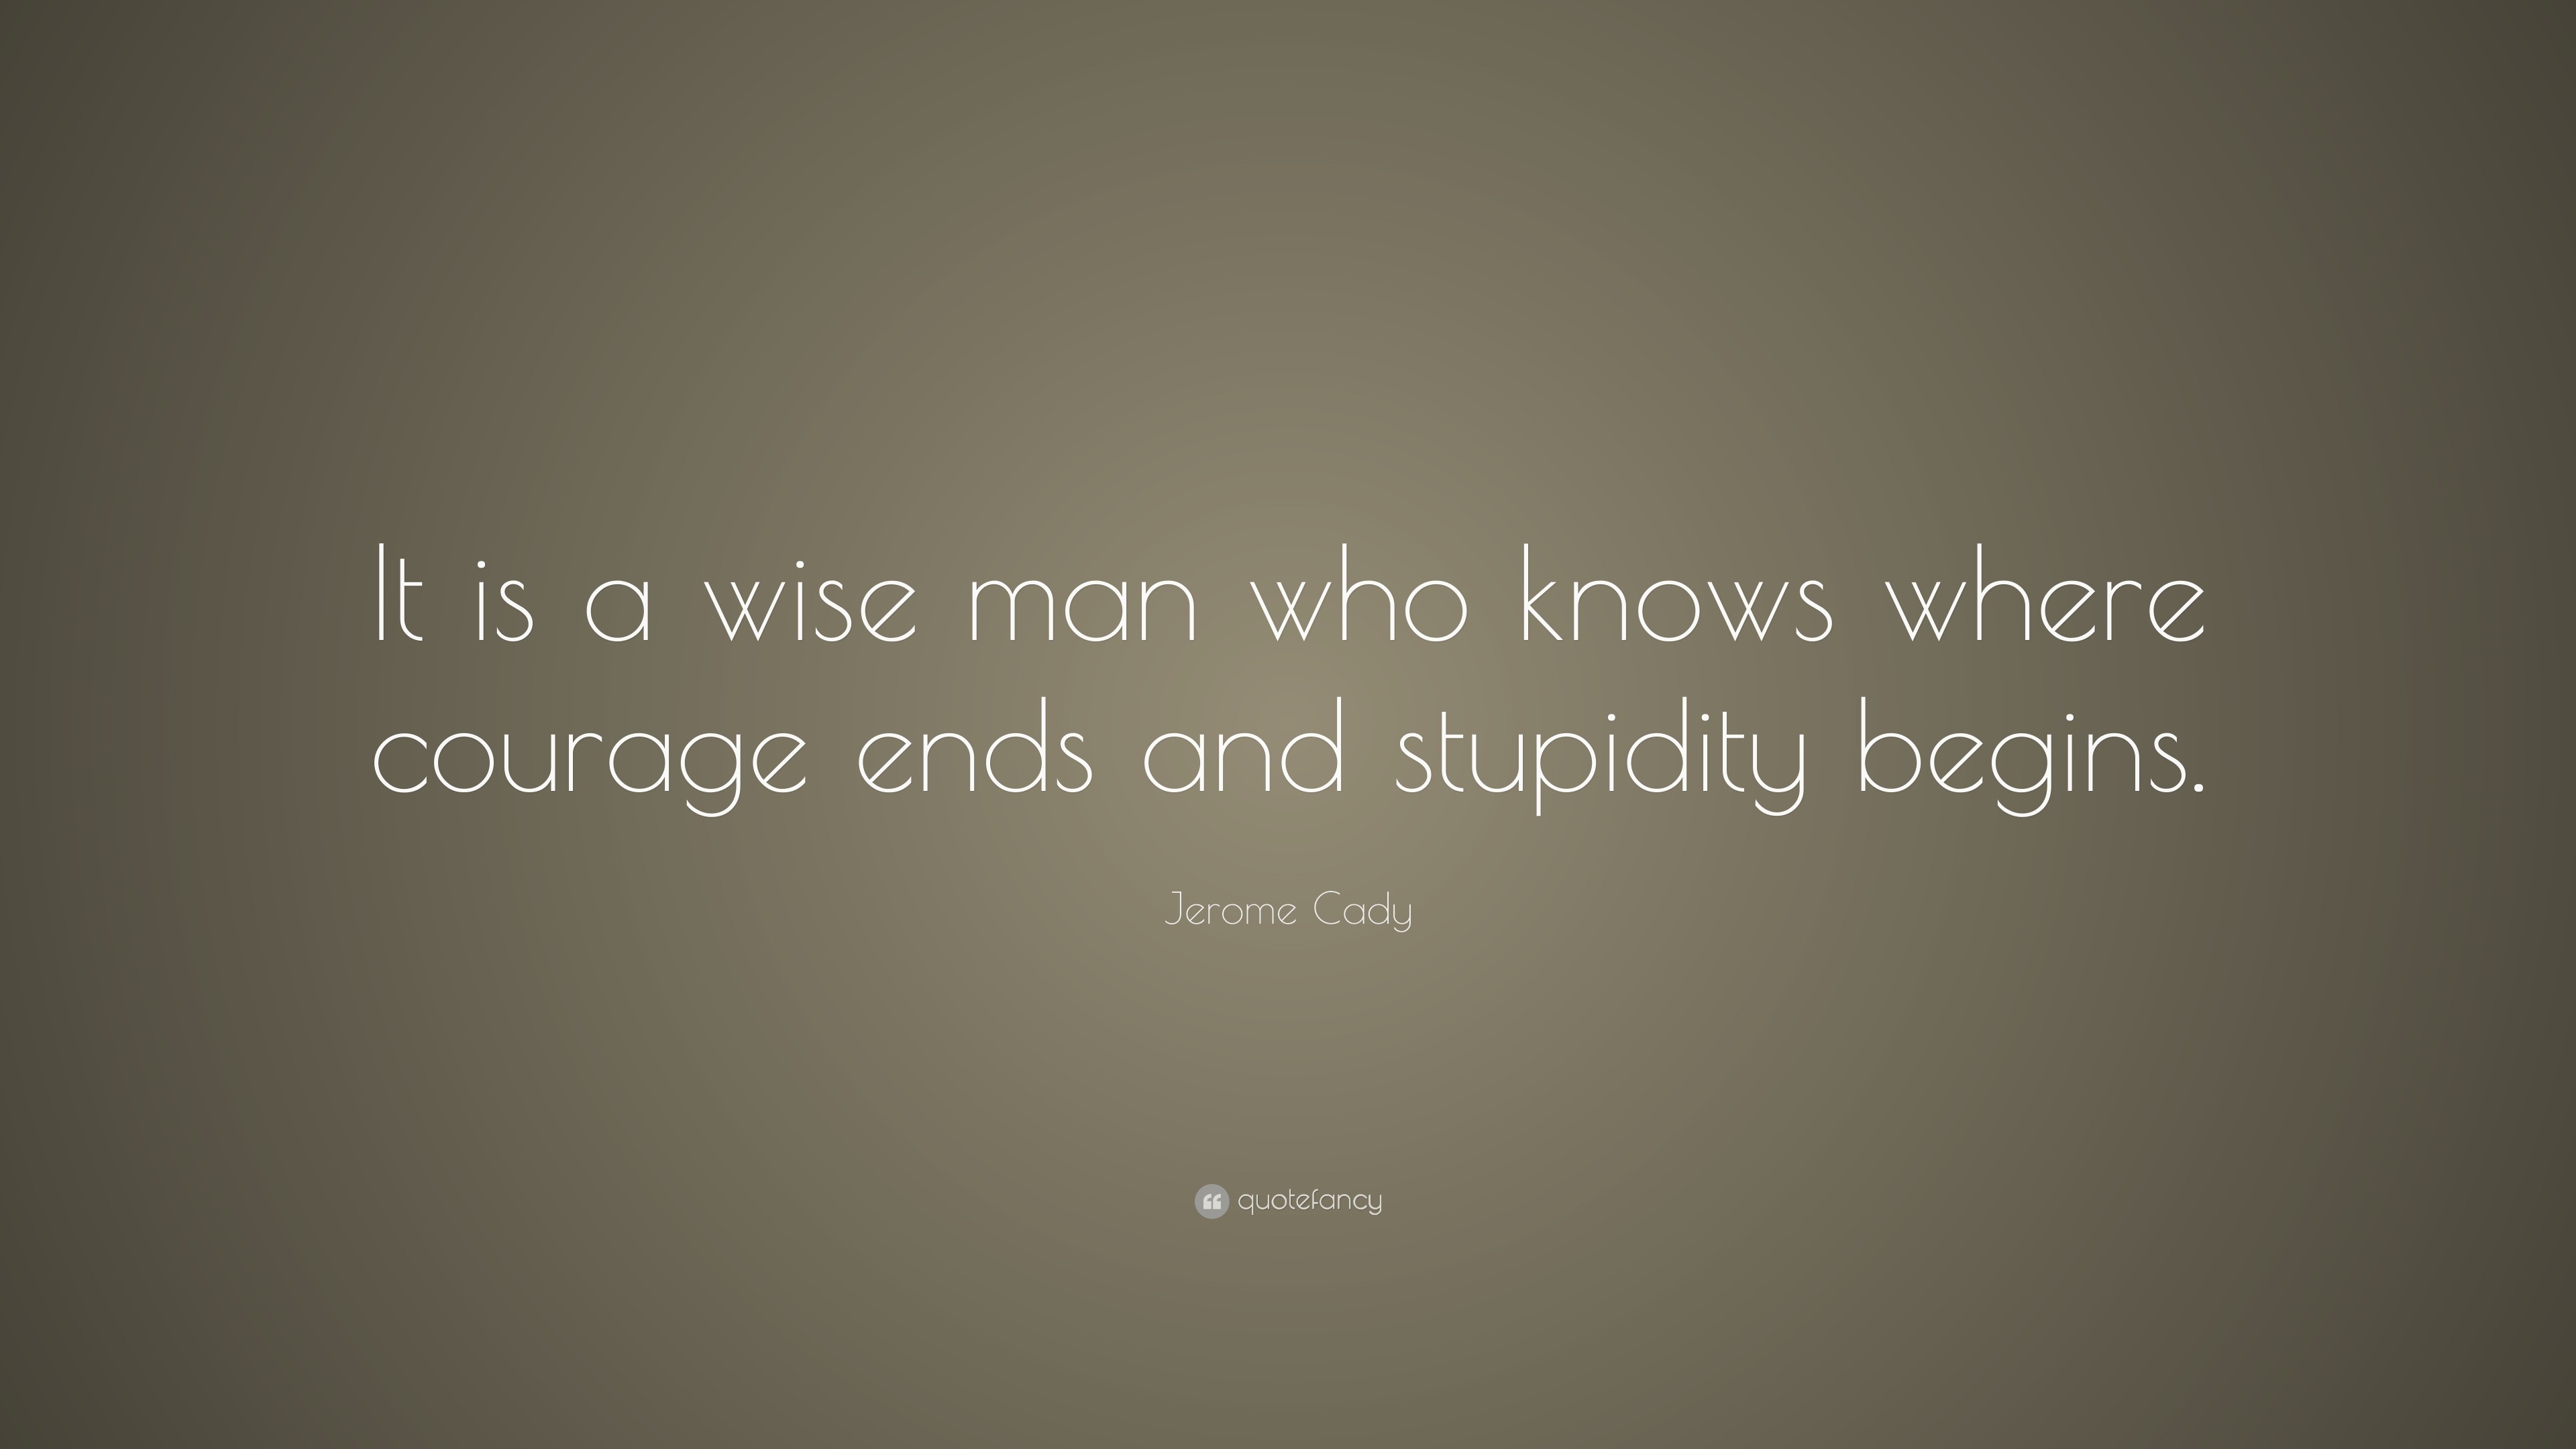 Jerome Cady Quote: “It is a wise man who knows where courage ends and ...